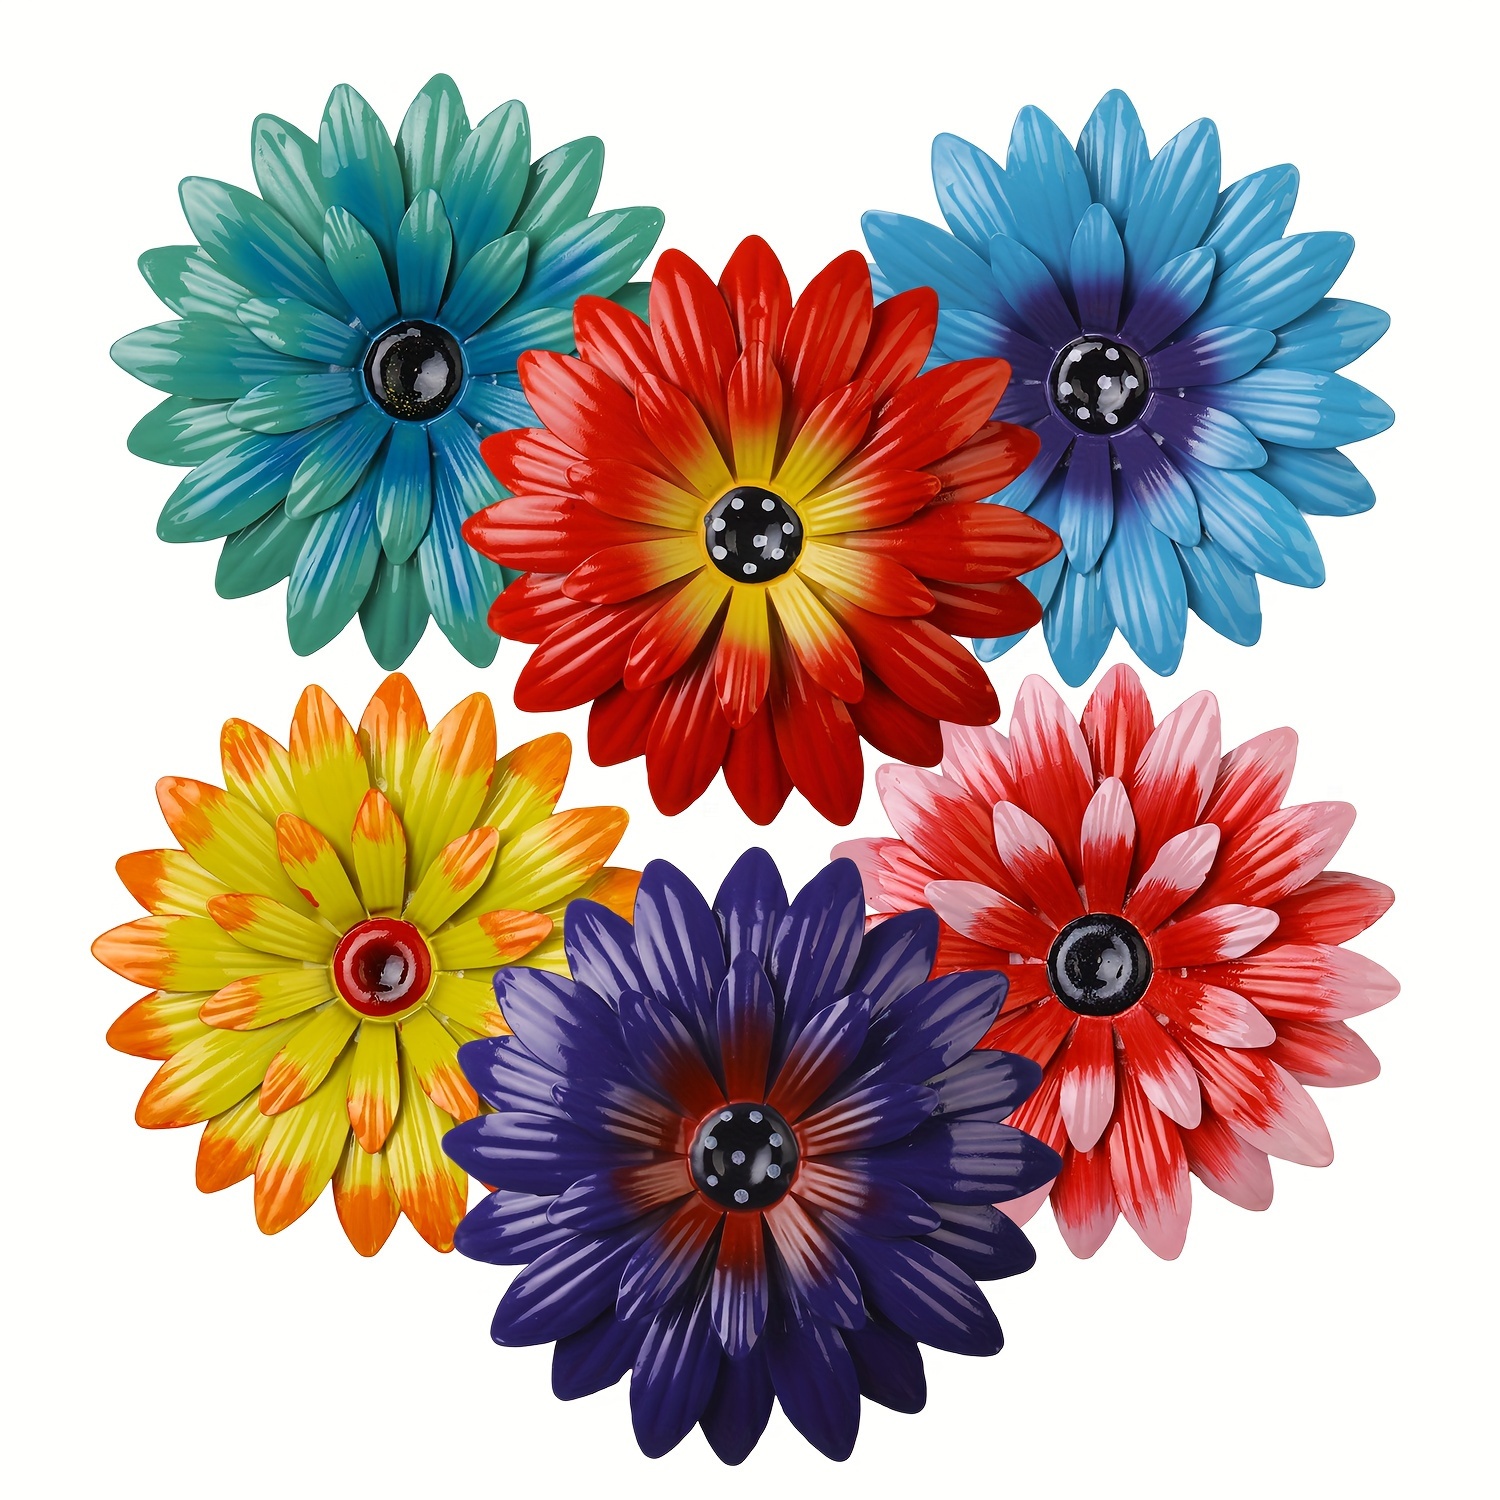 

1pc Metal Iron Sunflower Wall Decor, 8-inch Colorful Outdoor Garden Decorations, Creative Villa Yard Art Hangings, Festive Holiday Wall Supplies, Multi-color Flowers For Gardening Enthusiasts